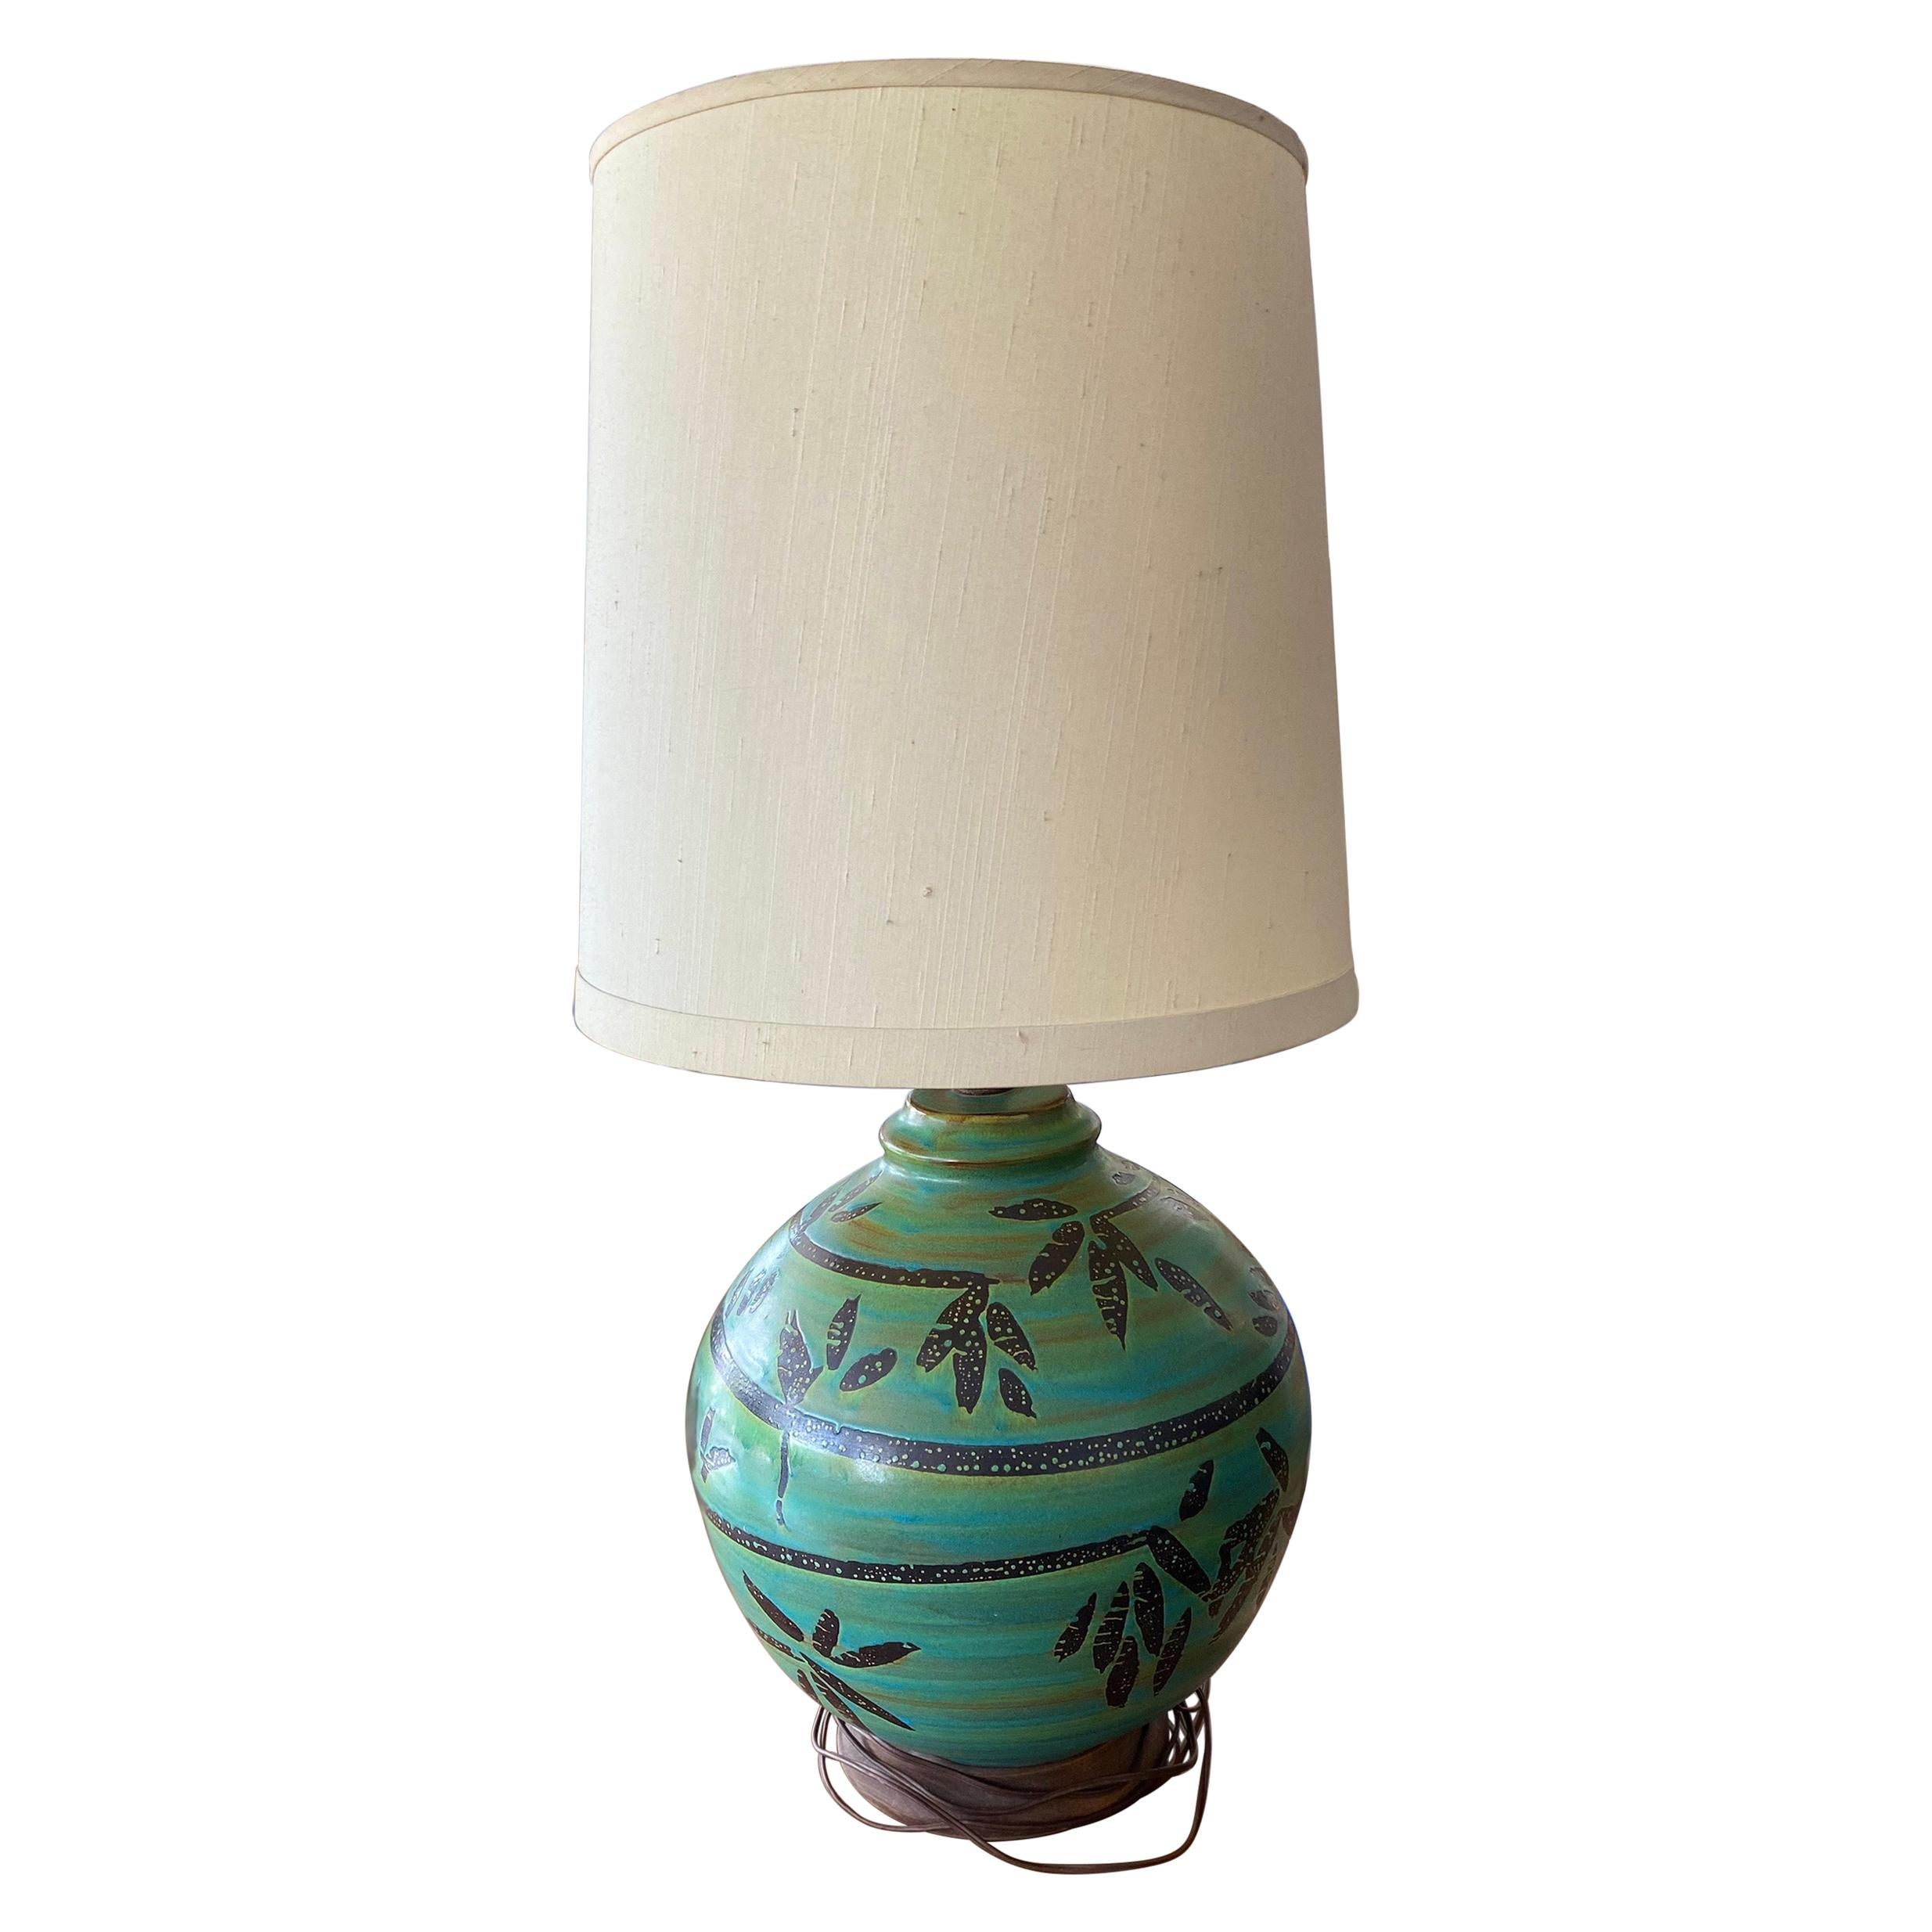 Vintage California Pottery Table Lamp